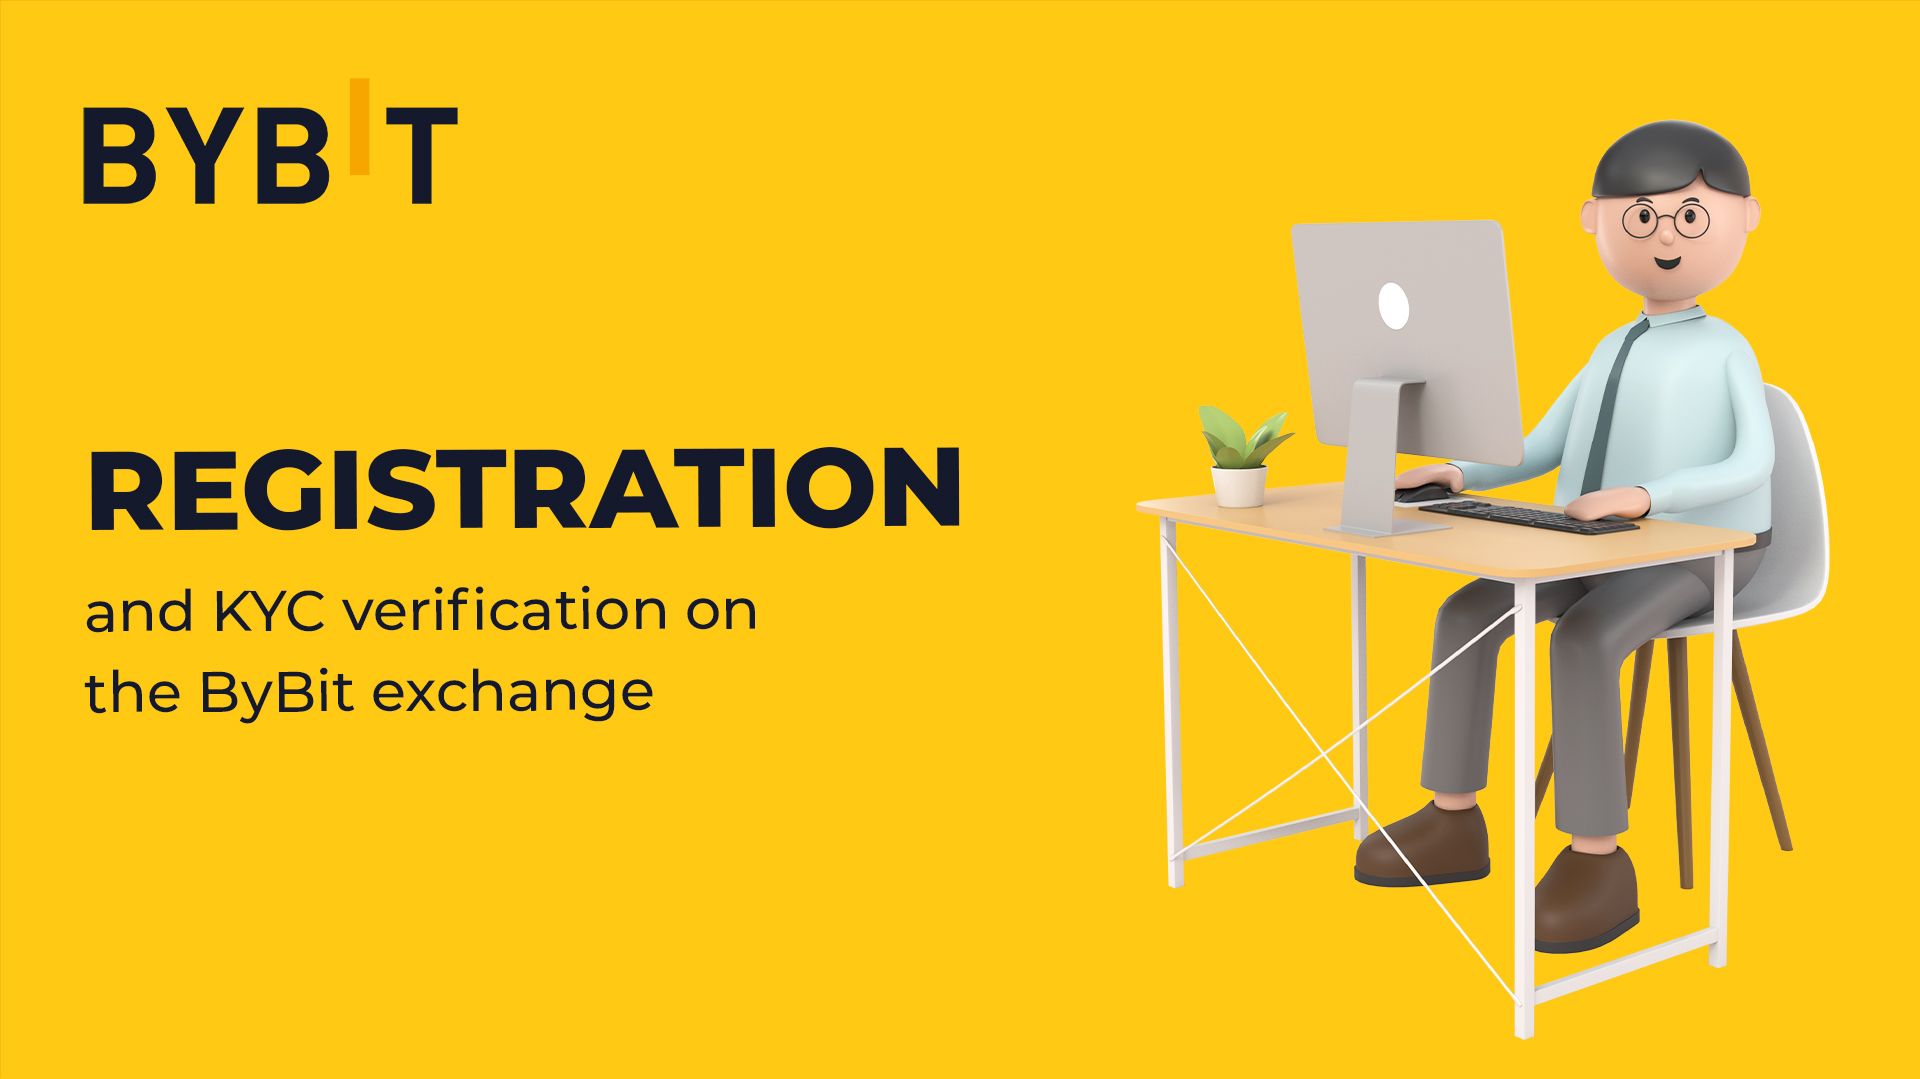 REGISTRATION AND KYC VERIFICATION ON THE BYBIT EXCHANGE.